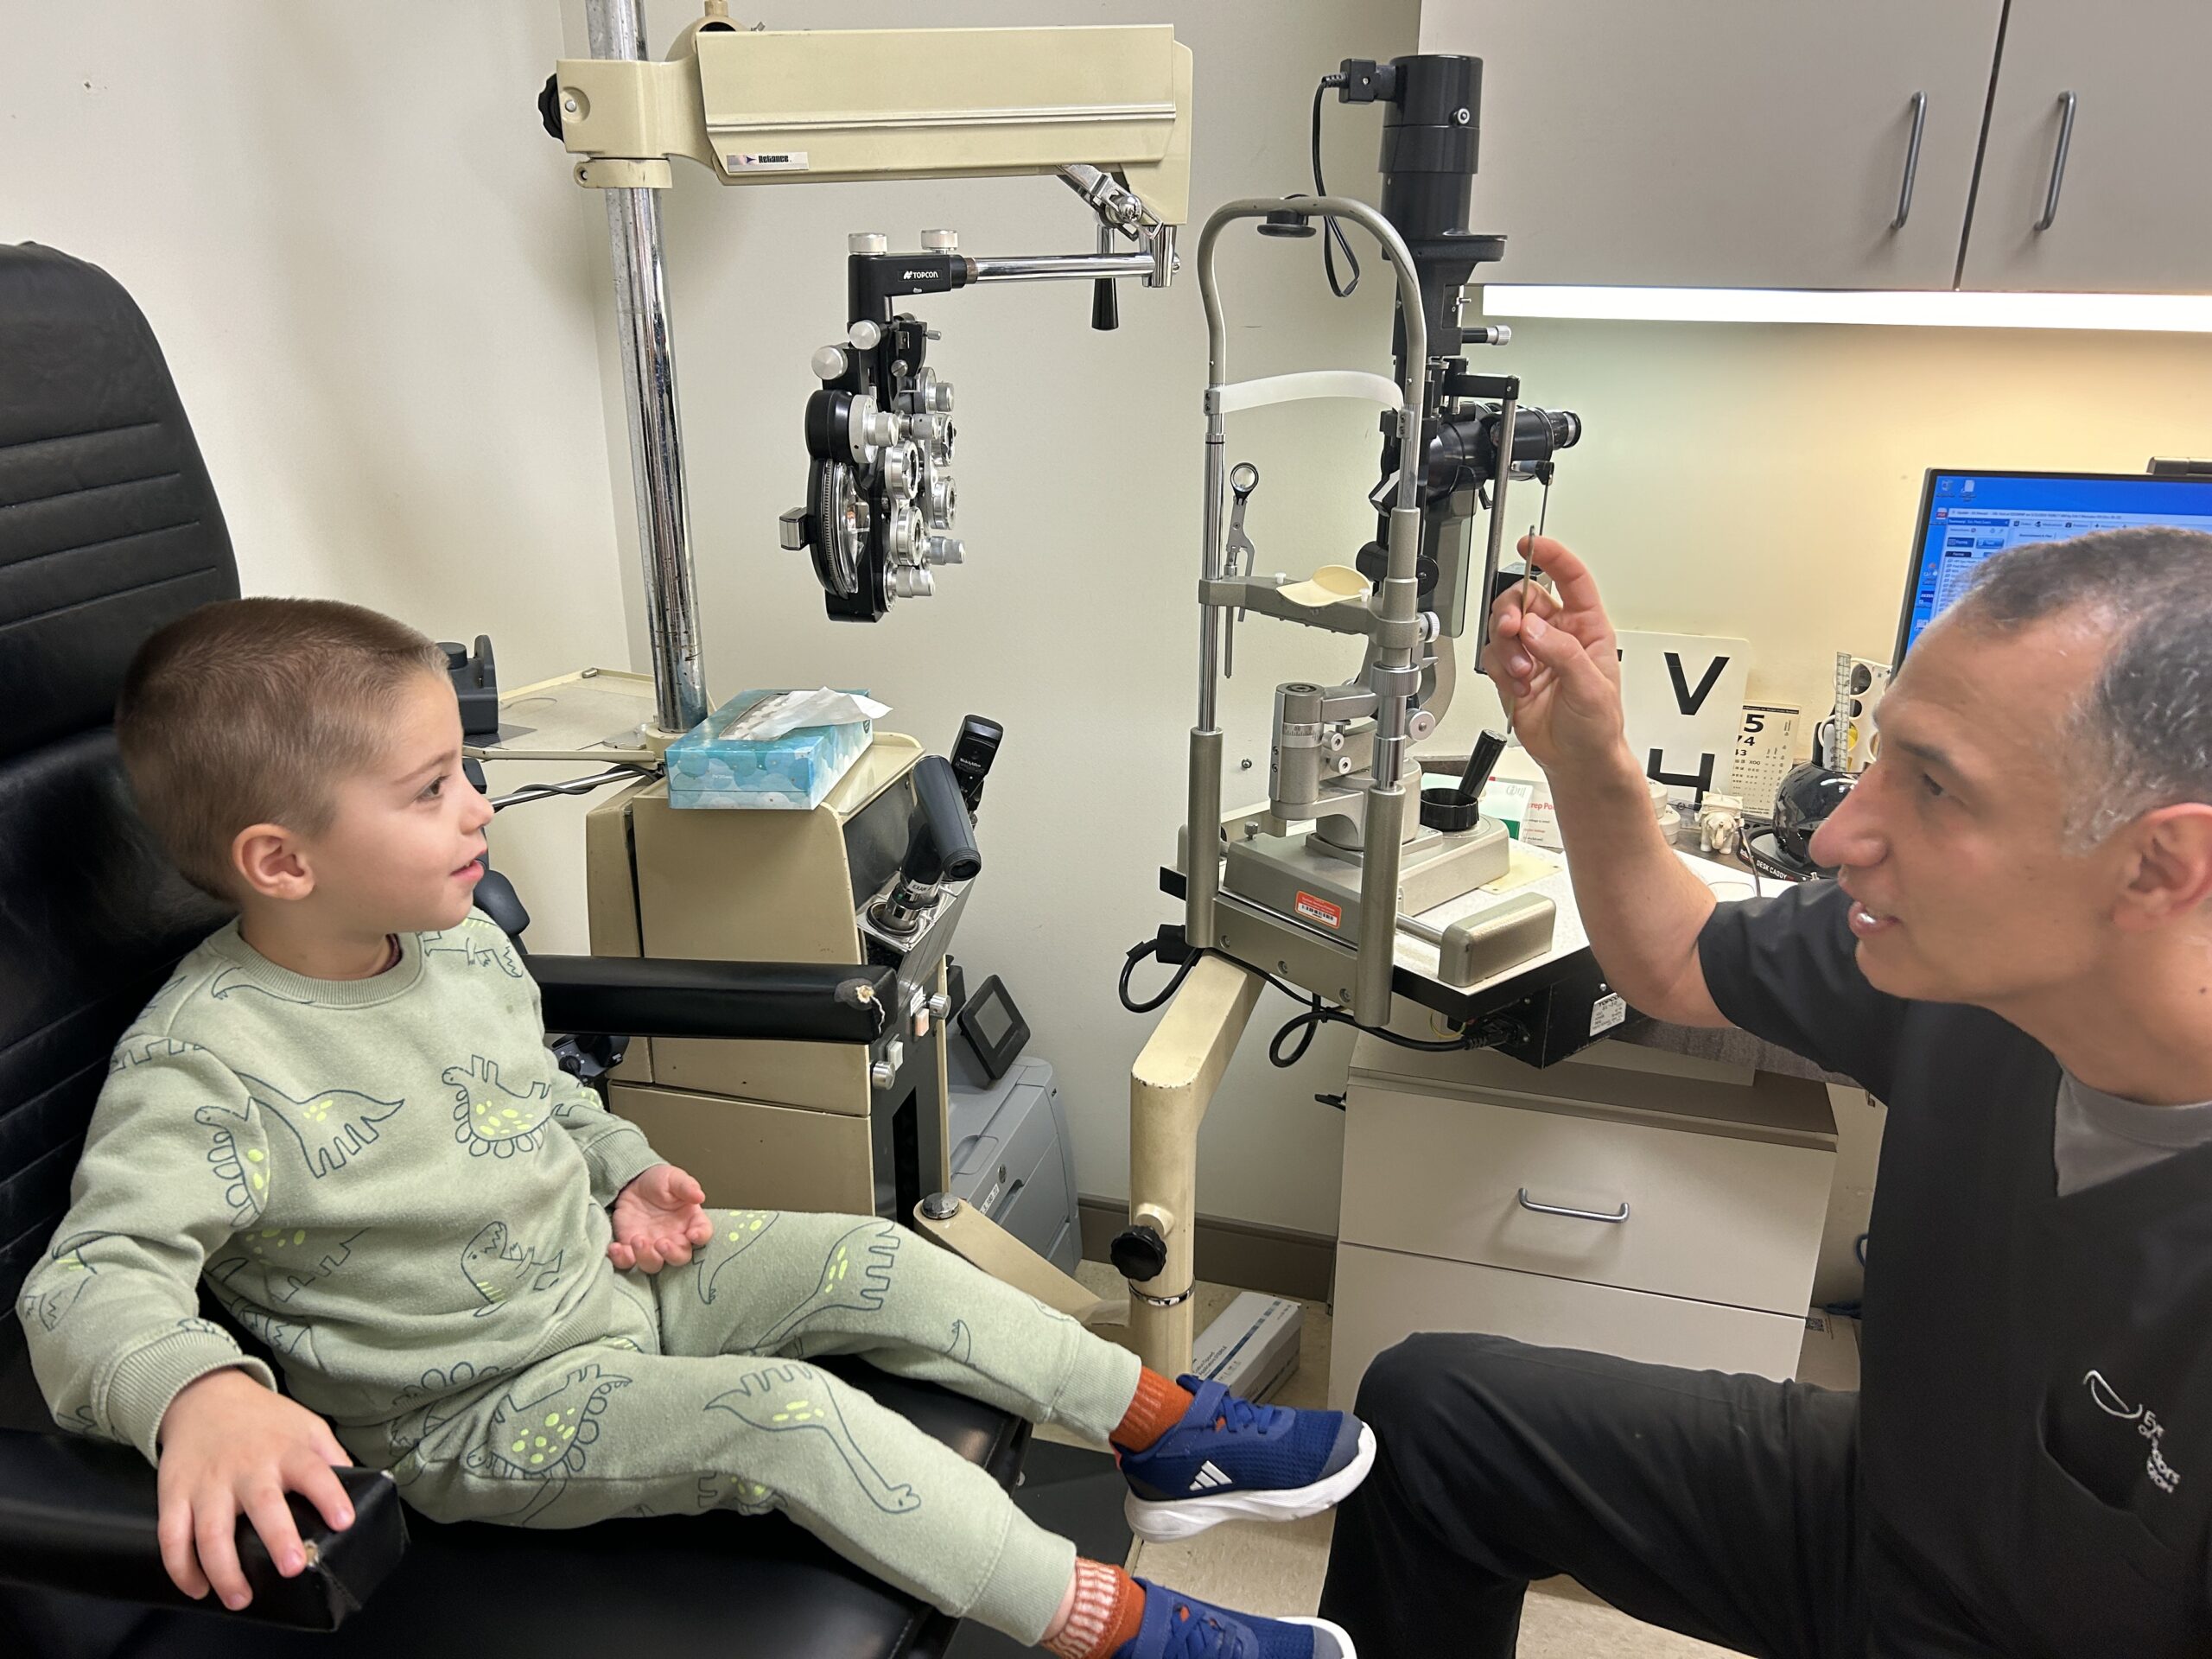 Doctor giving child eye exam at the doctor's office.